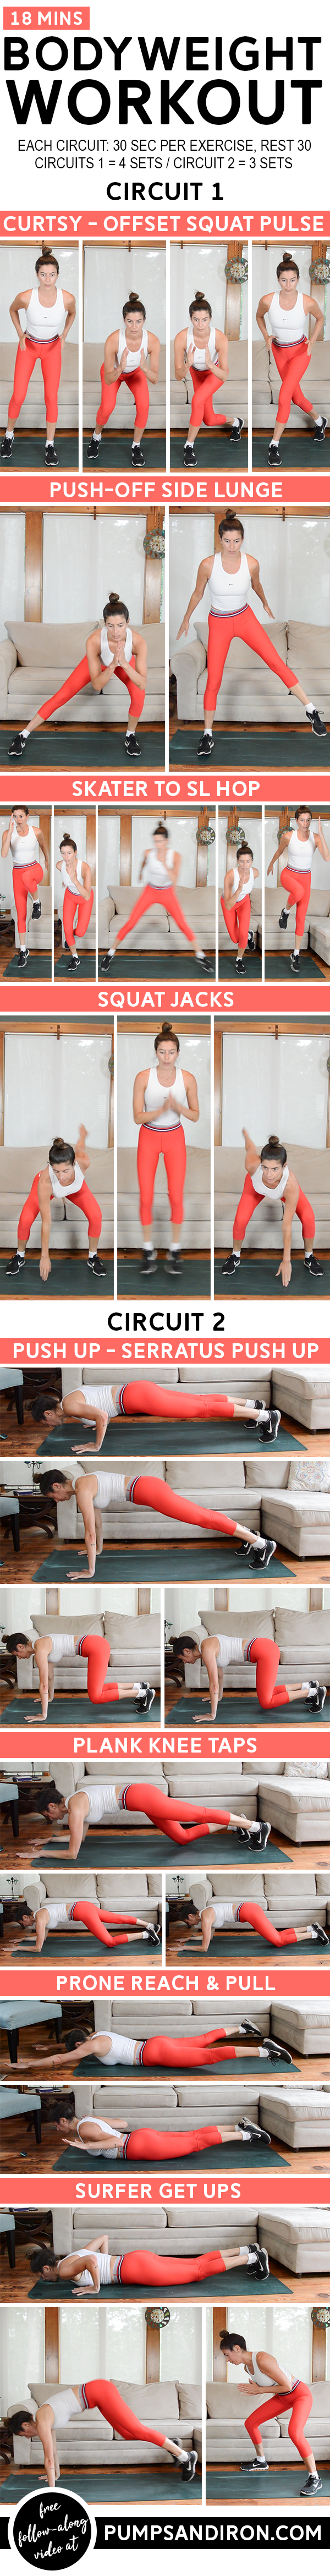 18-Min Quick Bodyweight Workout - This workout is broken up into two functional circuits. Video included! #bodyweighttraining #bodyweightworkout #workout